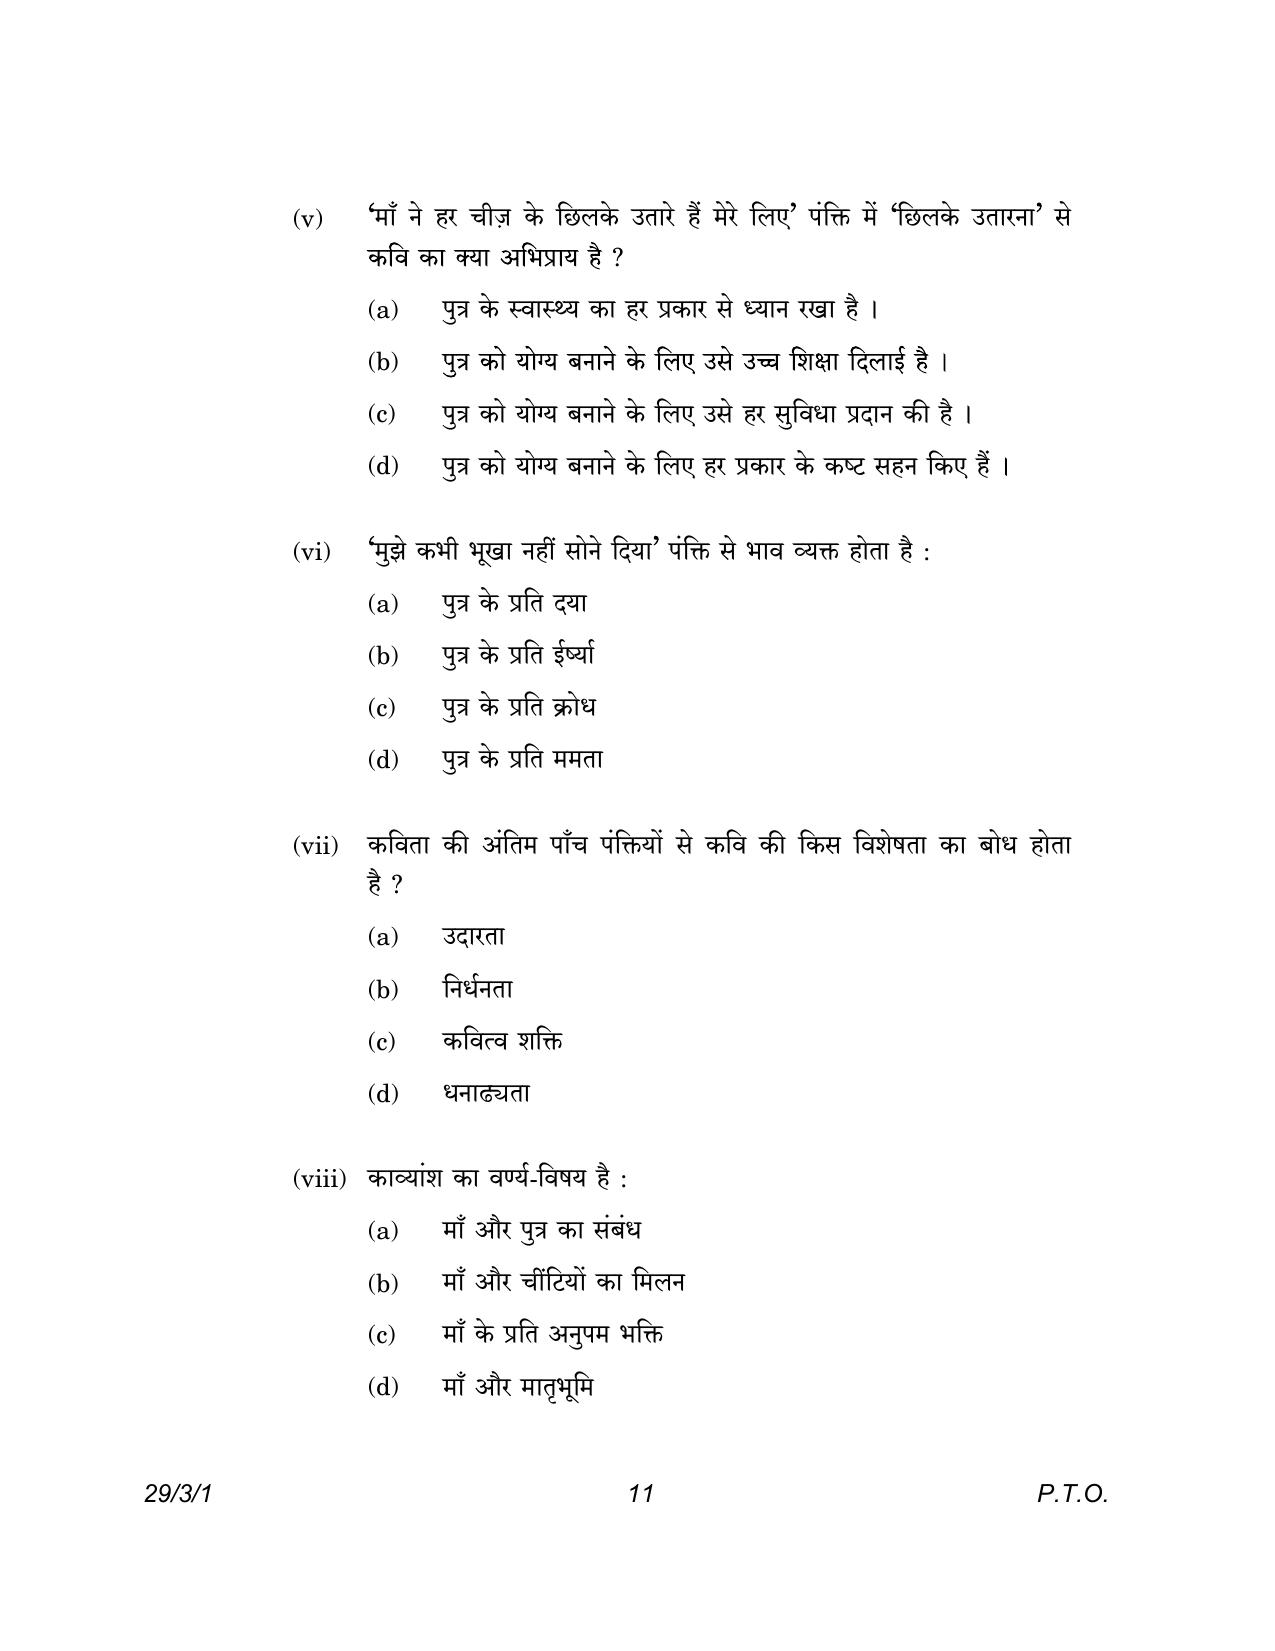 CBSE Class 12 29-3-1 Hindi Elective 2023 Question Paper - Page 11